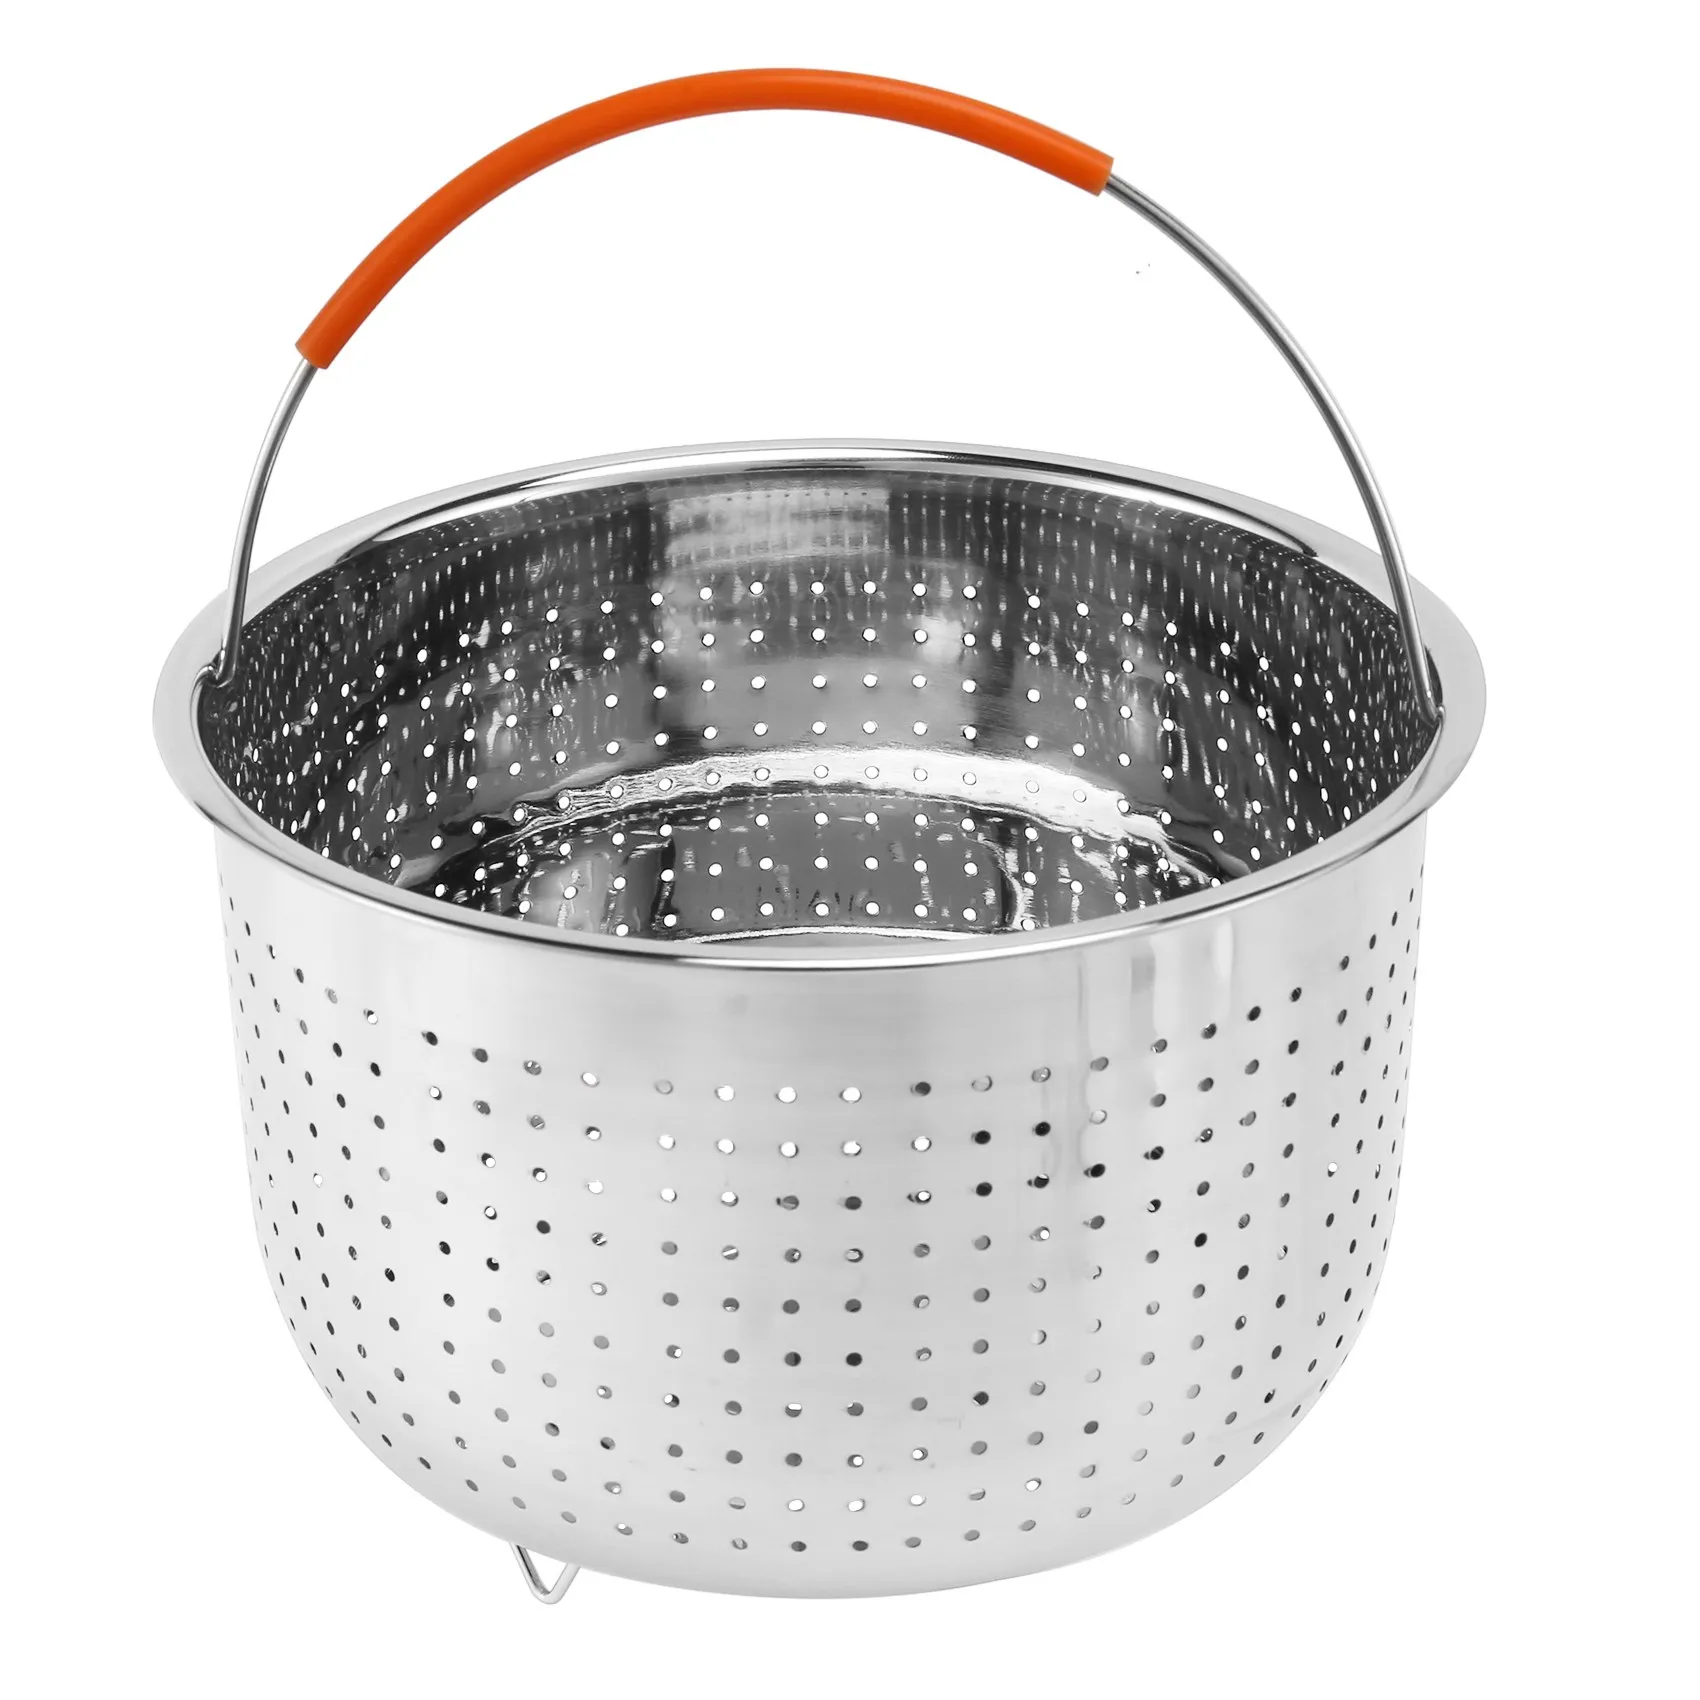 

Big Size Stainless Steel Steaming Basket Scalding-Proof Steaming Cage Multi-Functional Fruit Cleaning Basket